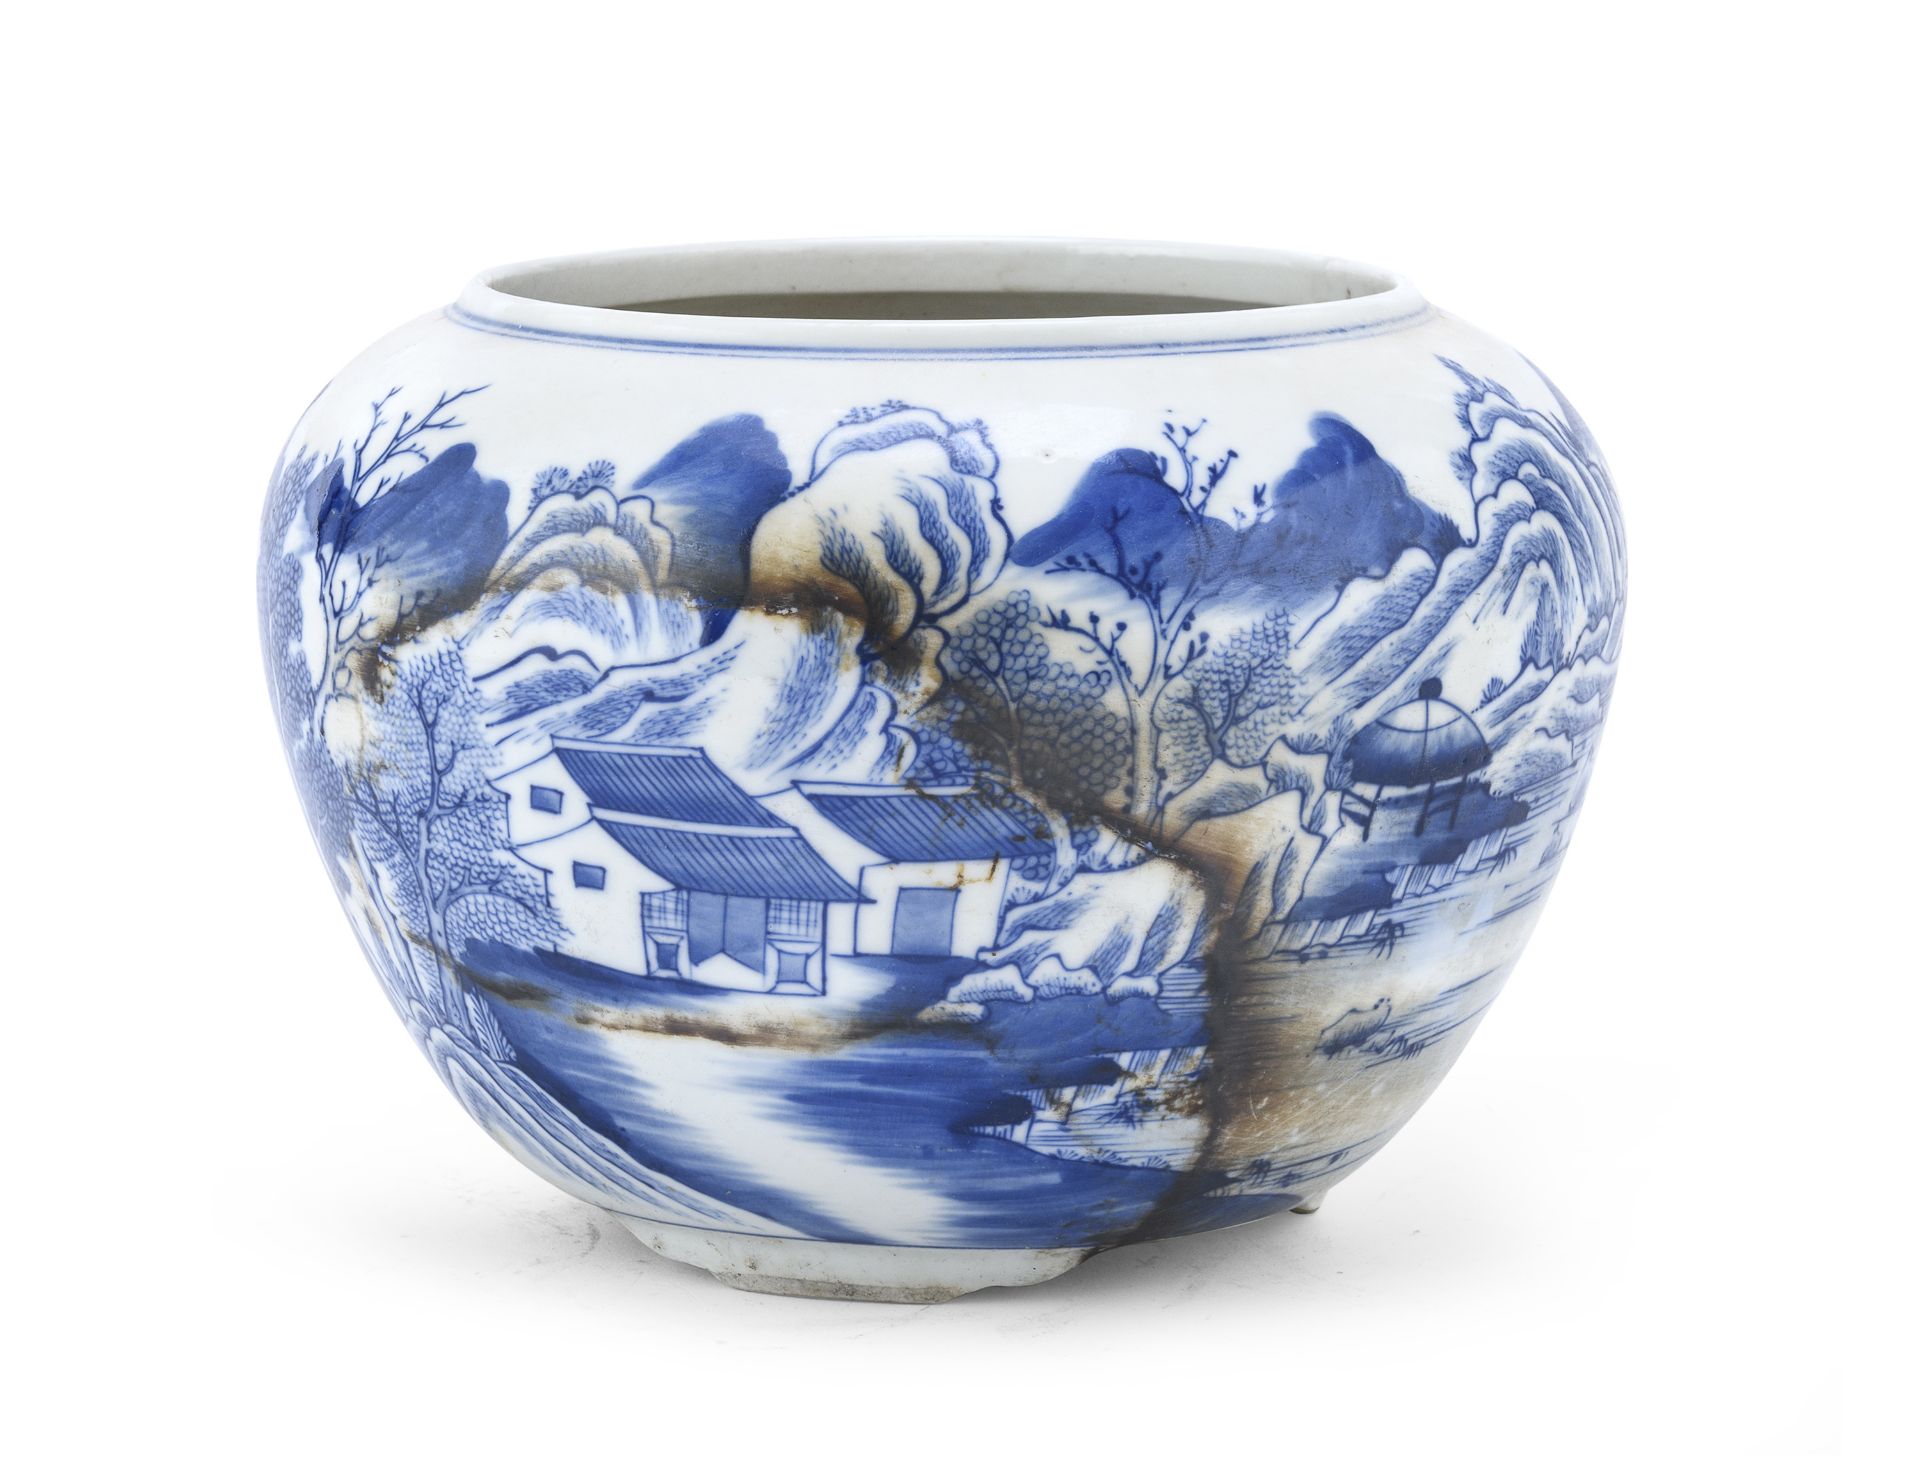 A CHINESE WHITE AND BLUE PORCELAIN CACHEPOT LATE 19TH CENTURY.